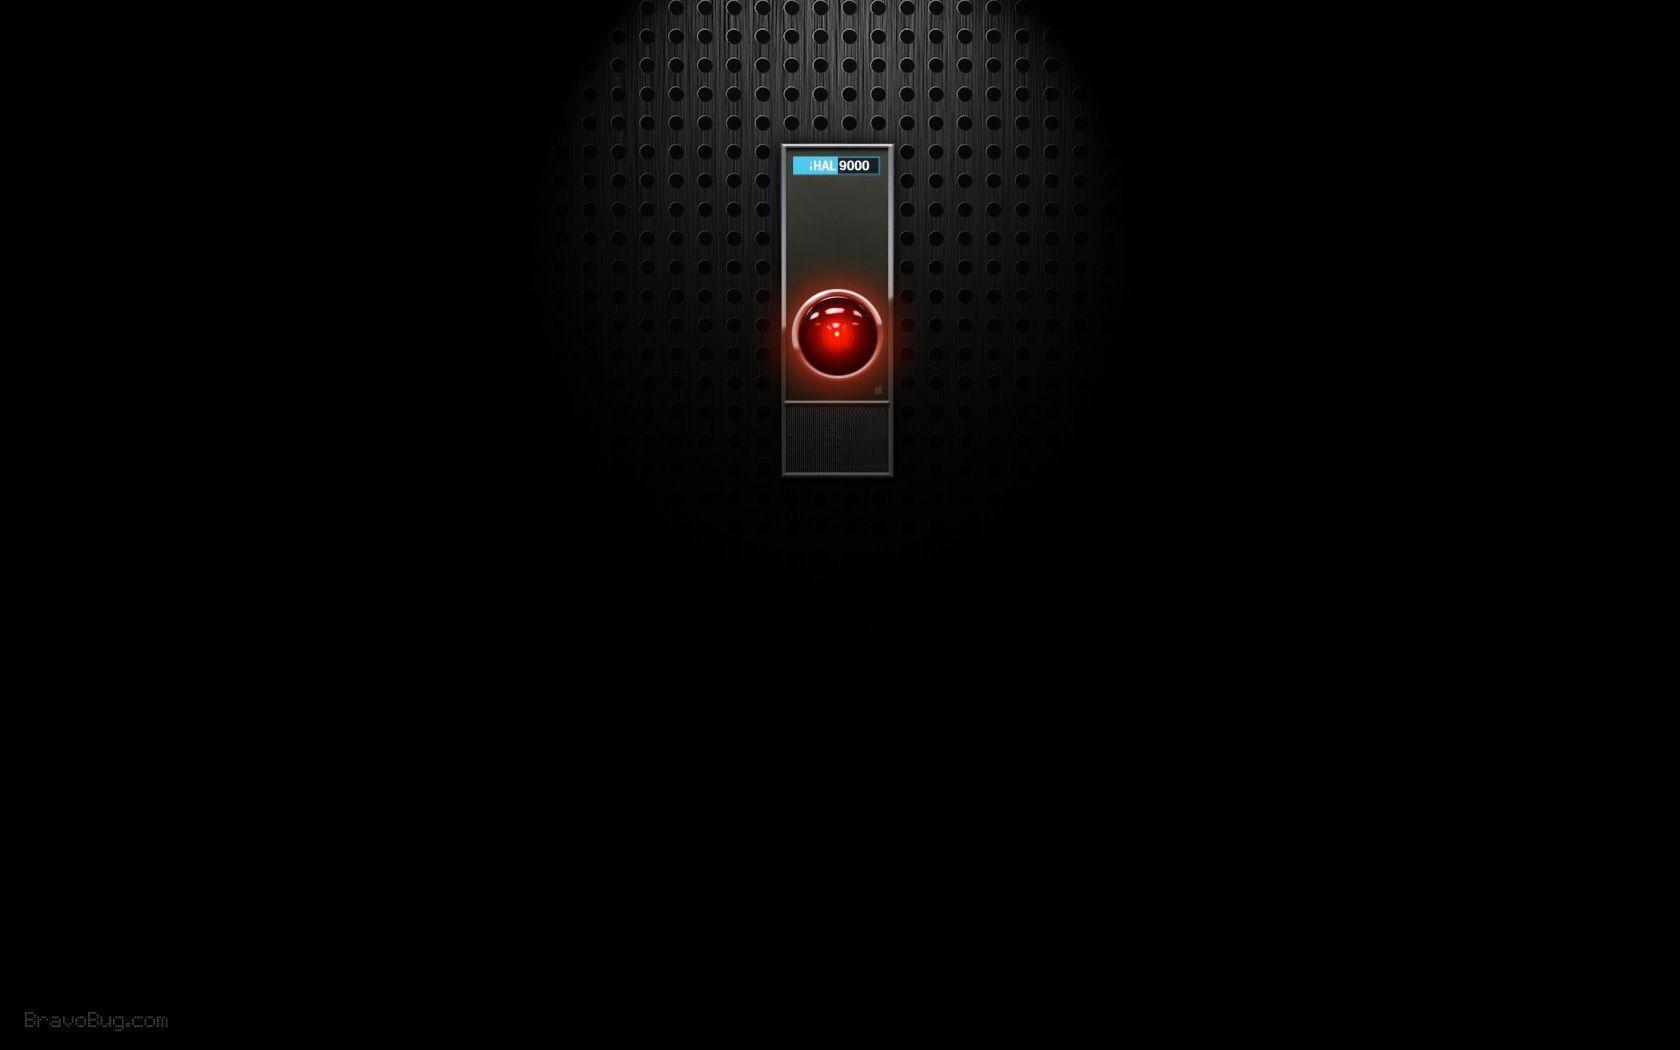 artificial intelligence image iHal 9000 by 'Ai